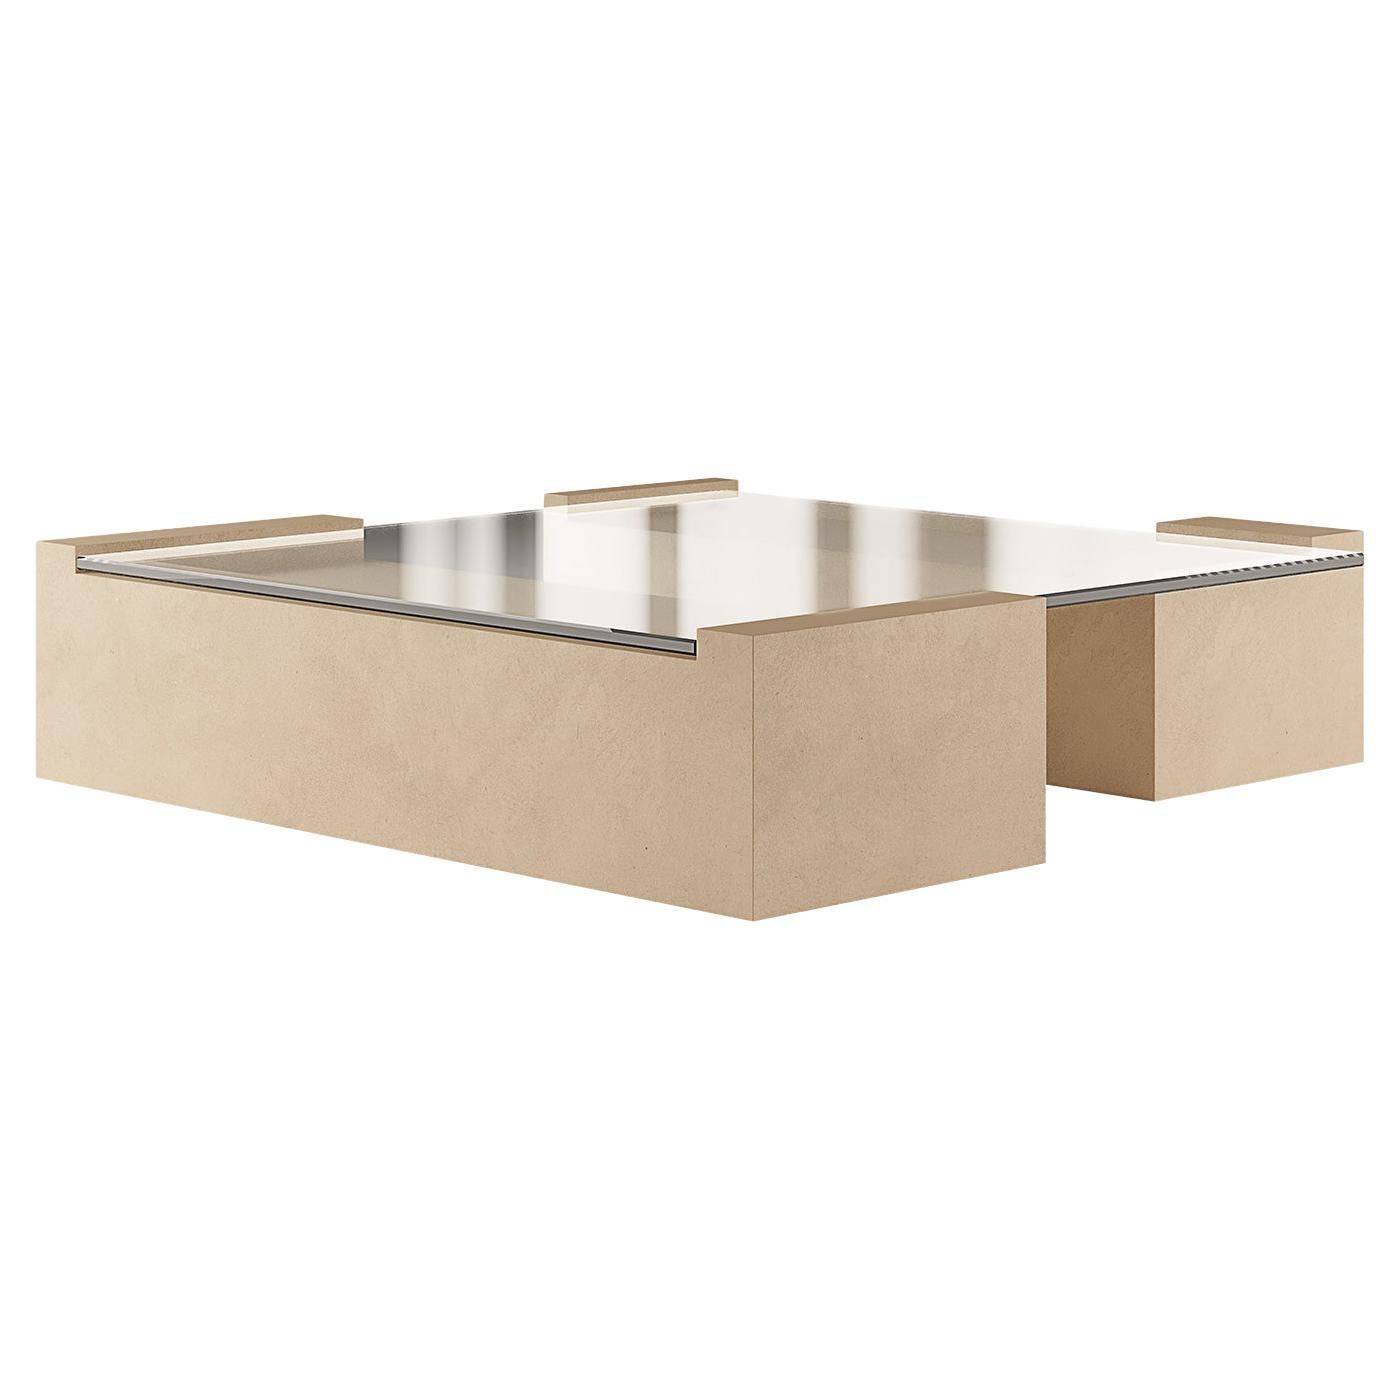 Brutalist Contemporary Center Table in Micro-Cement Sand Color, Tempered Glass